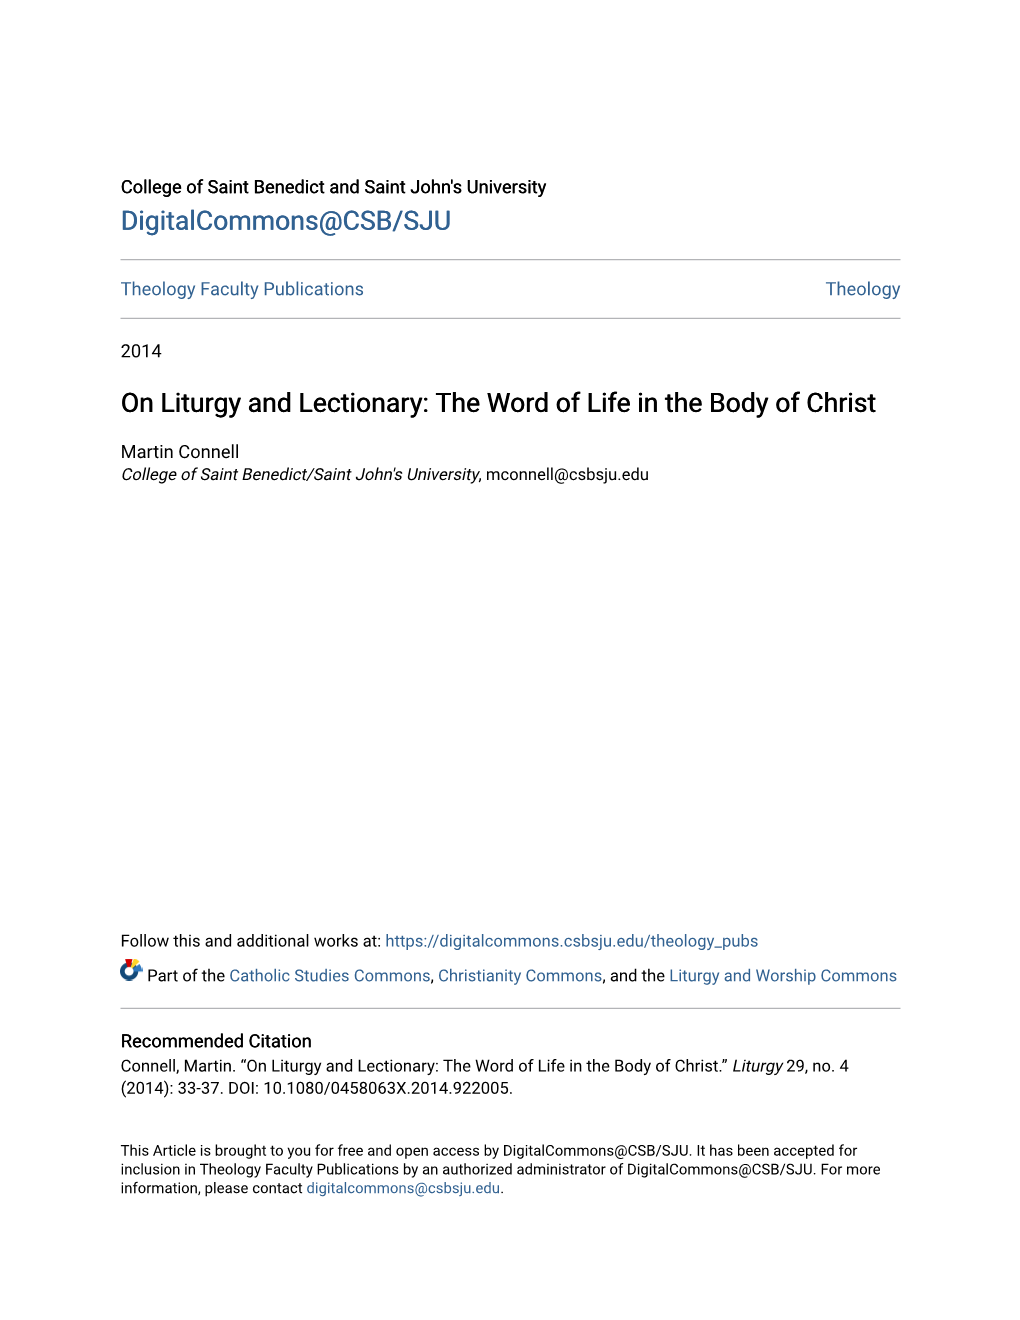 On Liturgy and Lectionary: the Word of Life in the Body of Christ